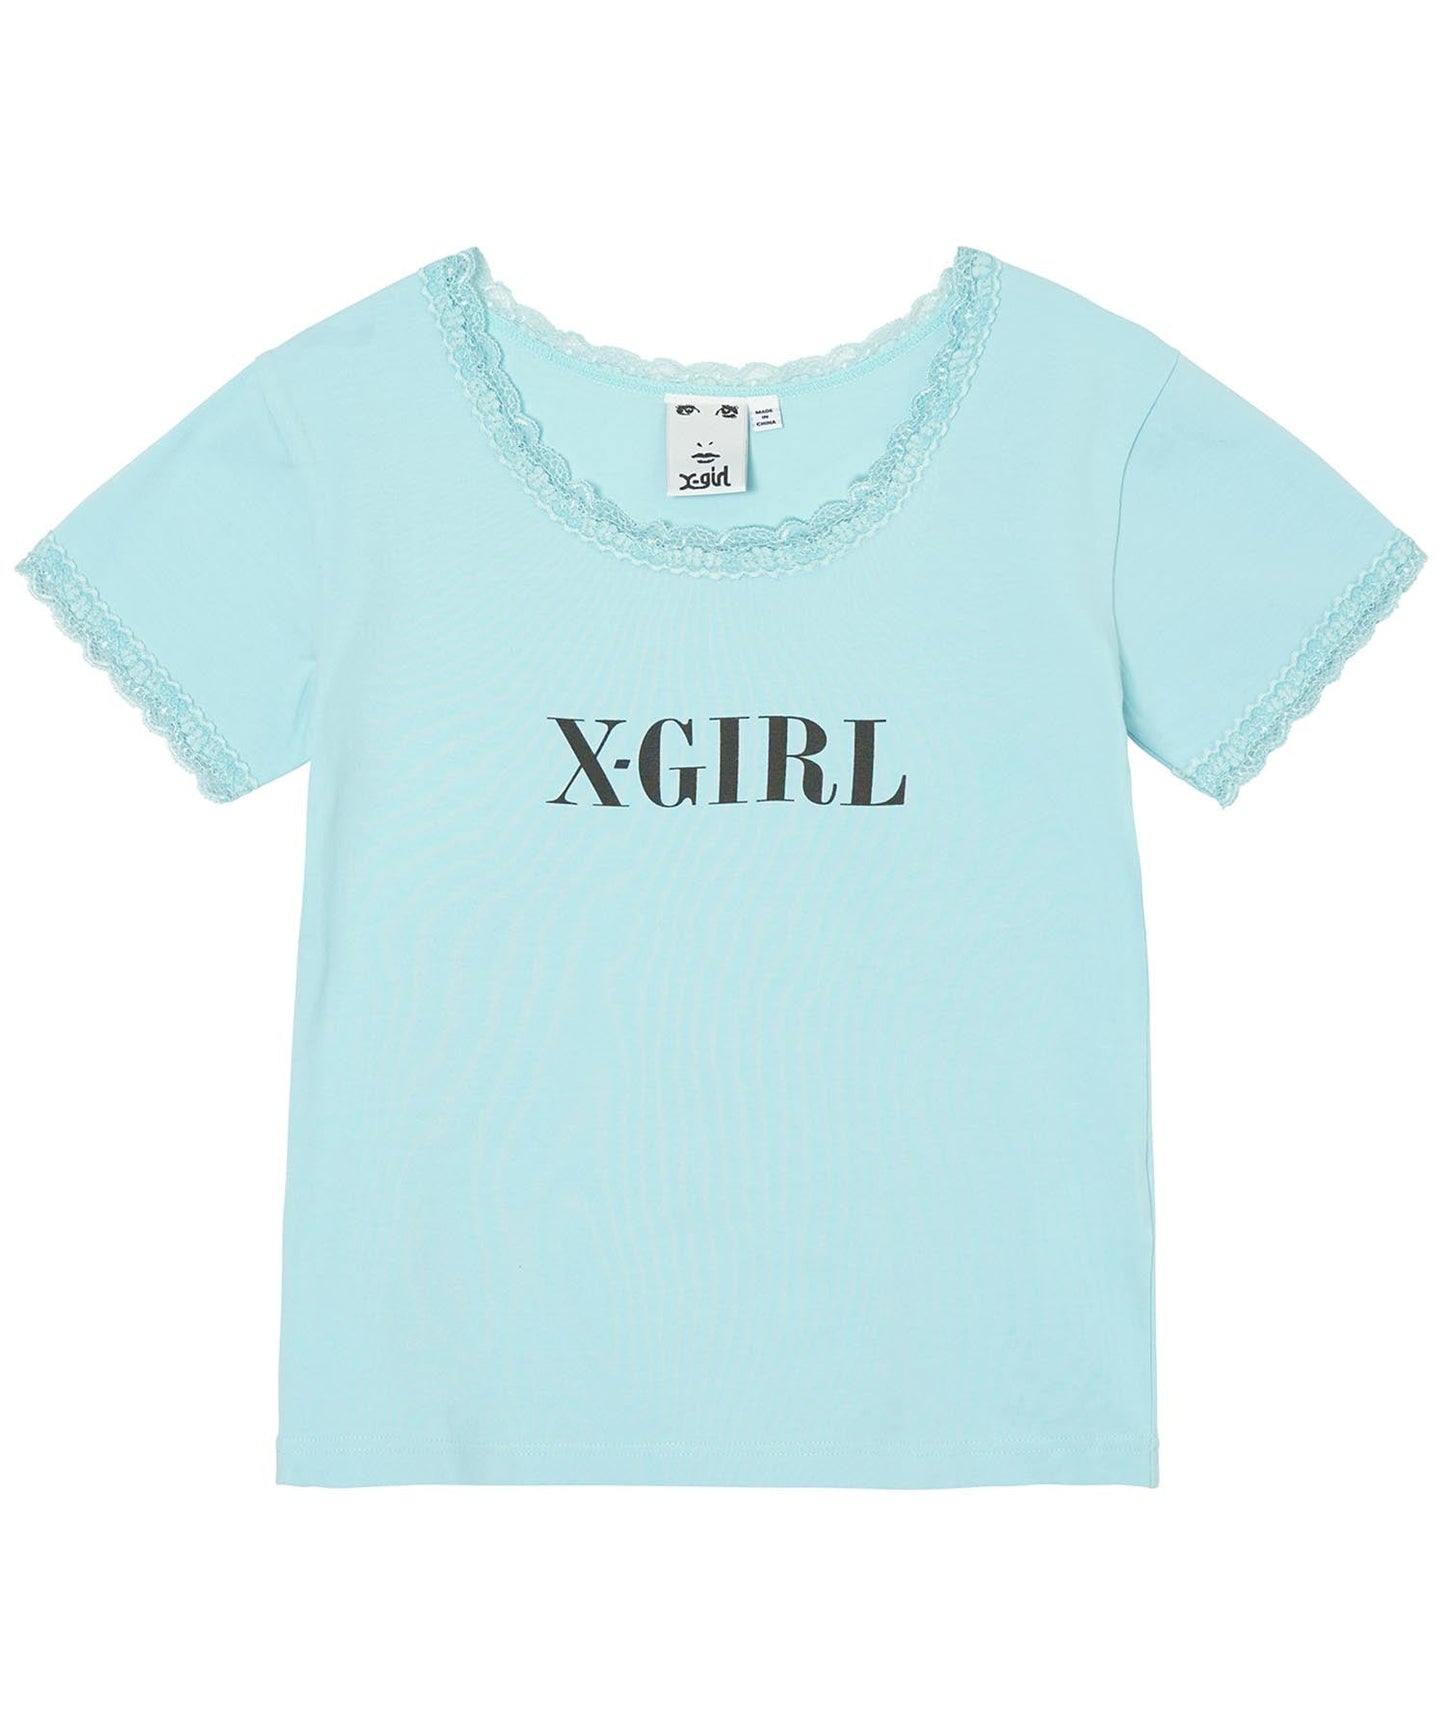 LACE S/S BABY TEE